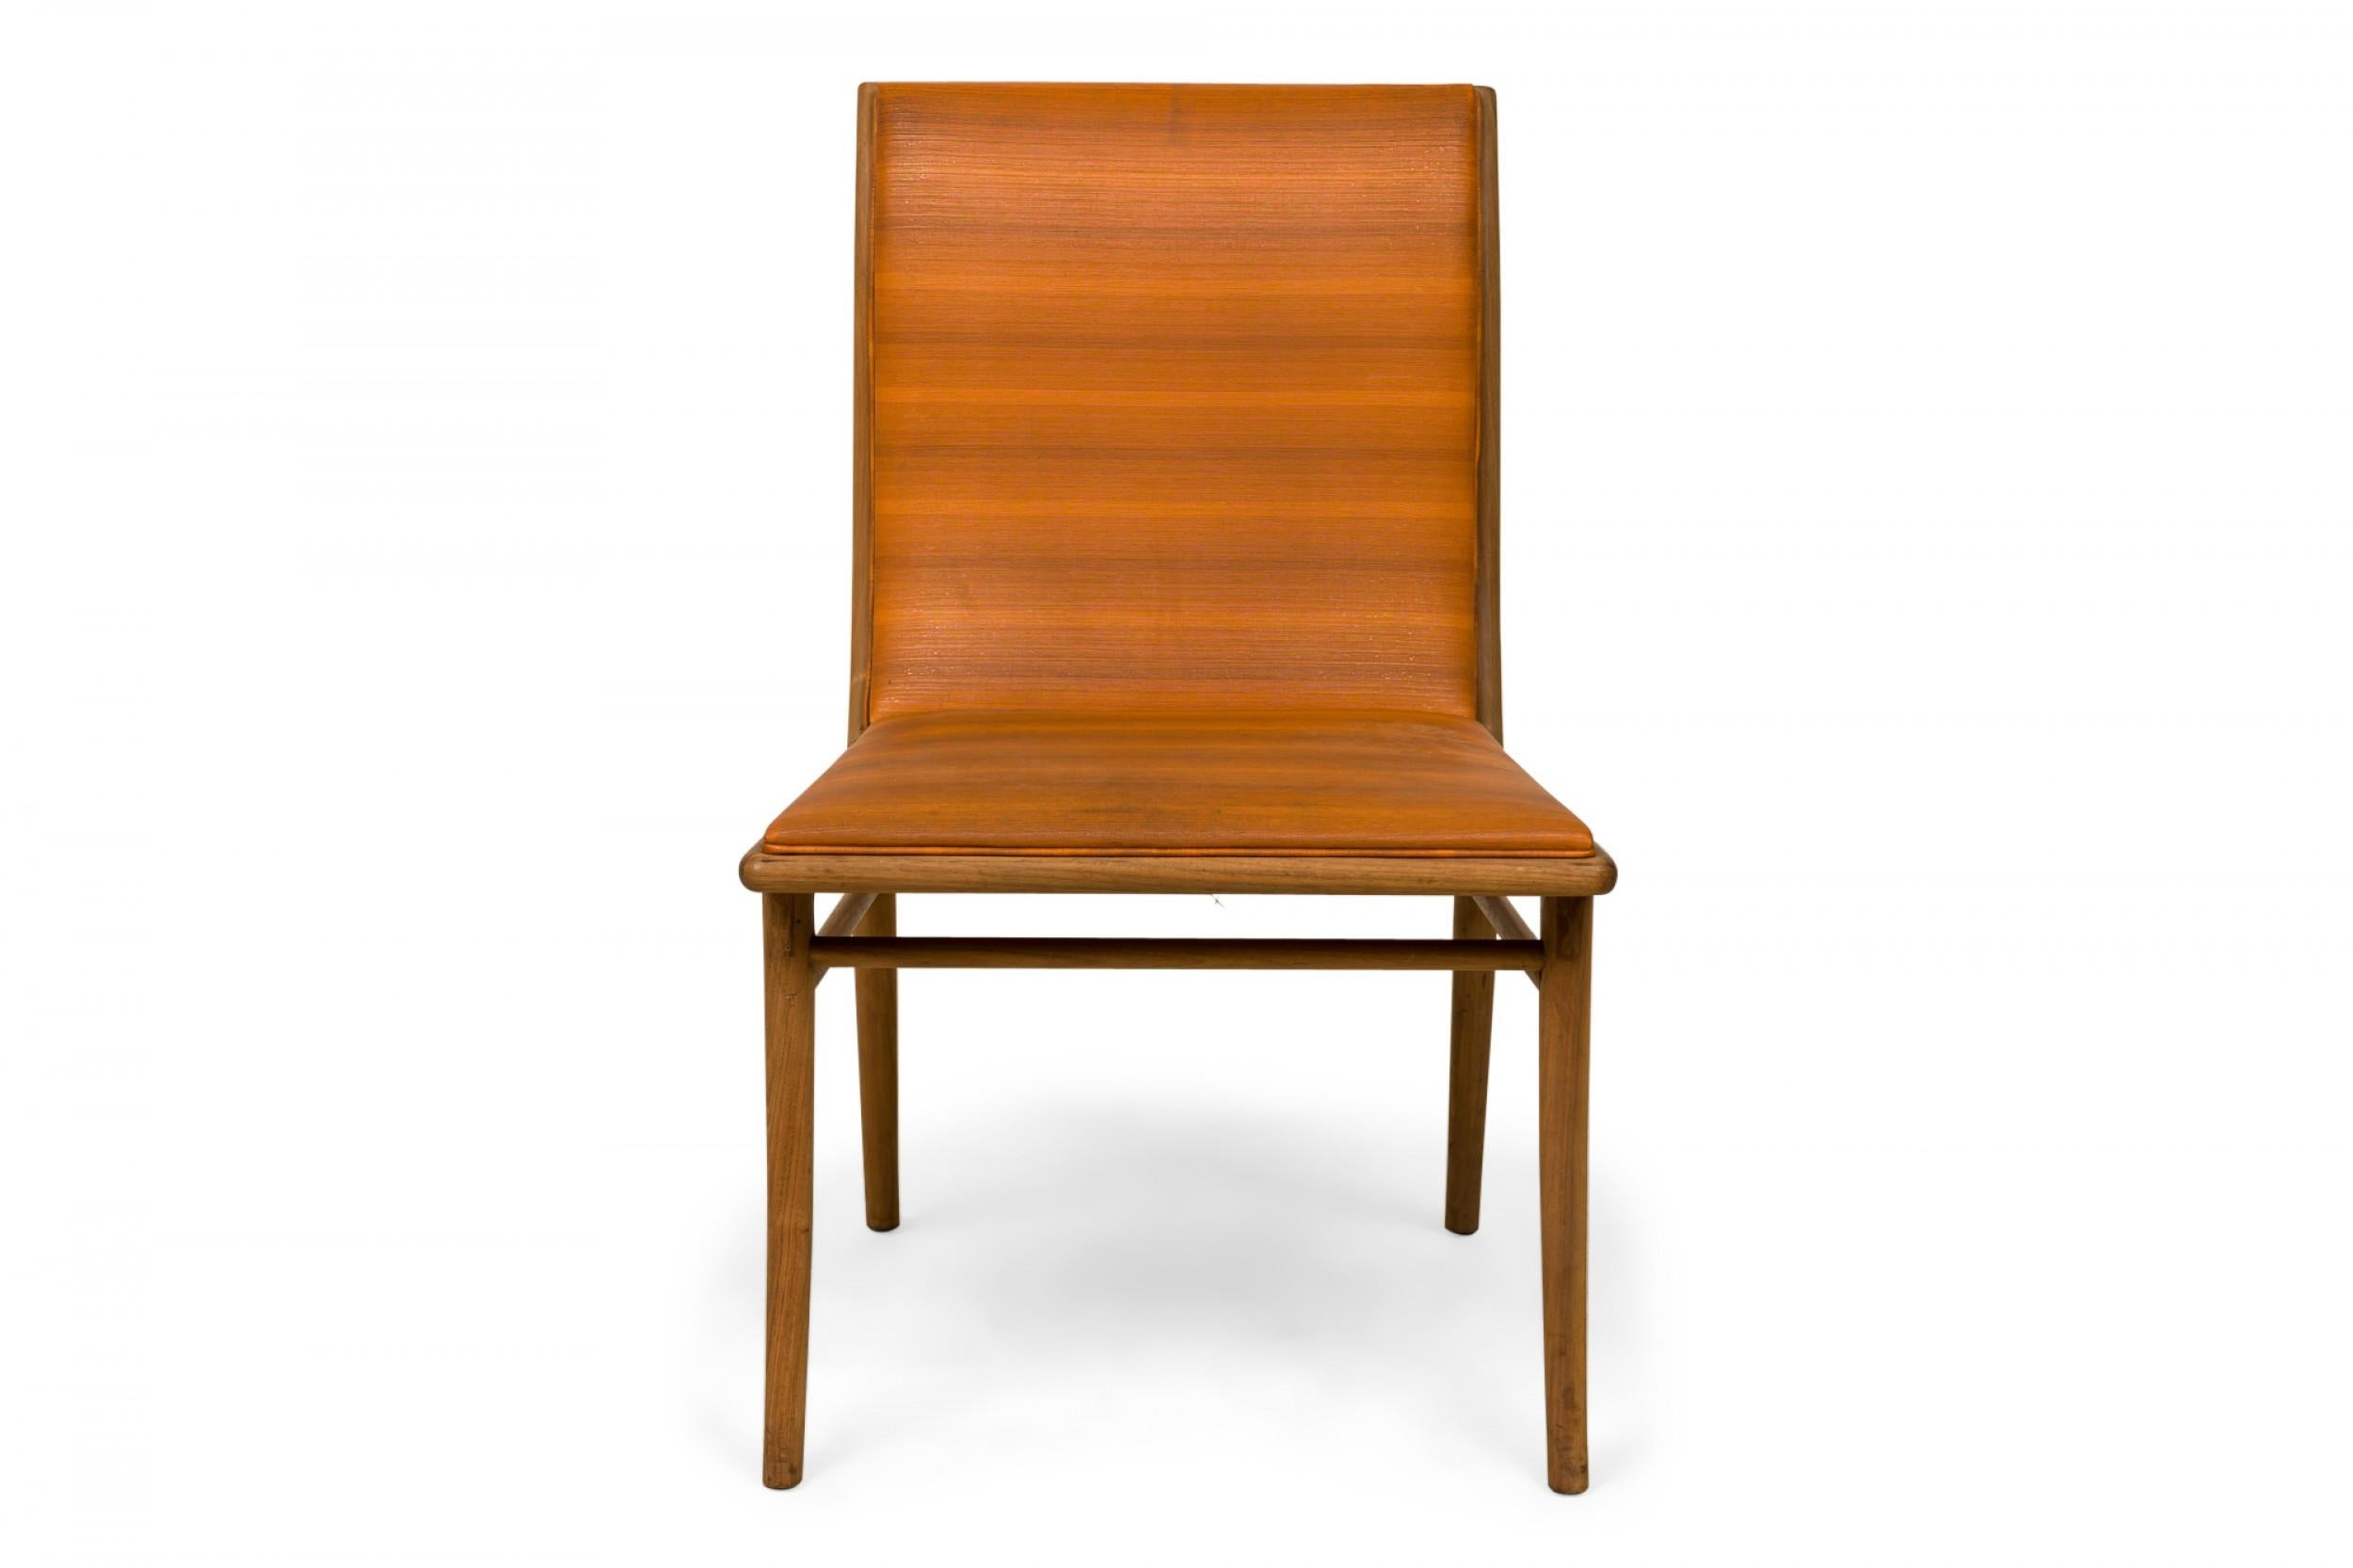 Mid-Century dining side chair with horizontally striped multi-tonal orange upholstery and a walnut frame with a curved slat back, resting on four tapered legs. (T.H. ROBSJOHN-GIBBINGS FOR WIDDICOMB FURNITURE COMPANY)
